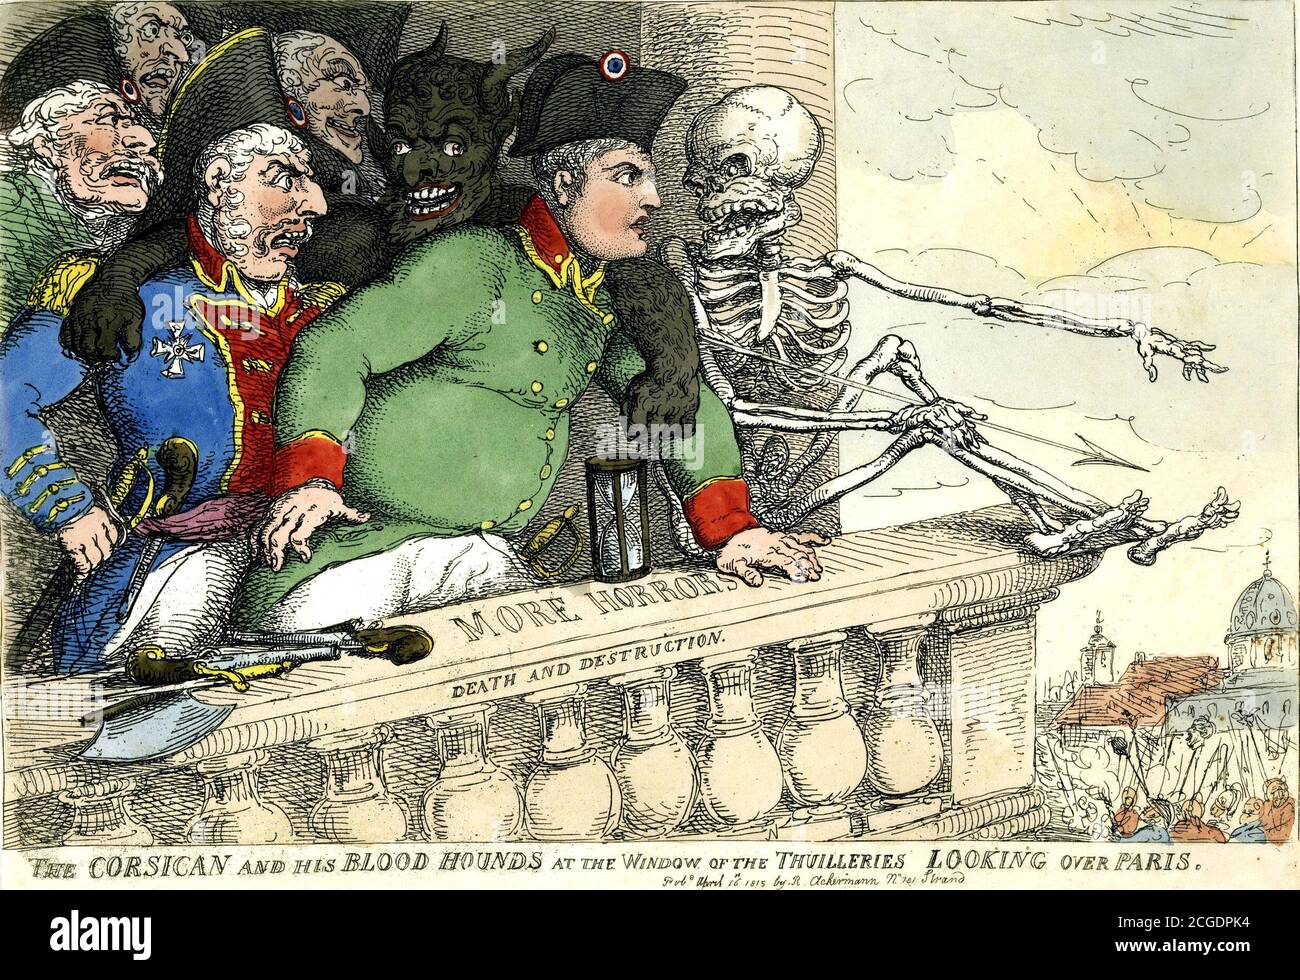 Satirical print about Napoleon entitled 'The Corsican and his blood hounds at the window of the Thuilleries looking over Paris' by Thomas Rowlandson (1757-1827), 1815 Stock Photo